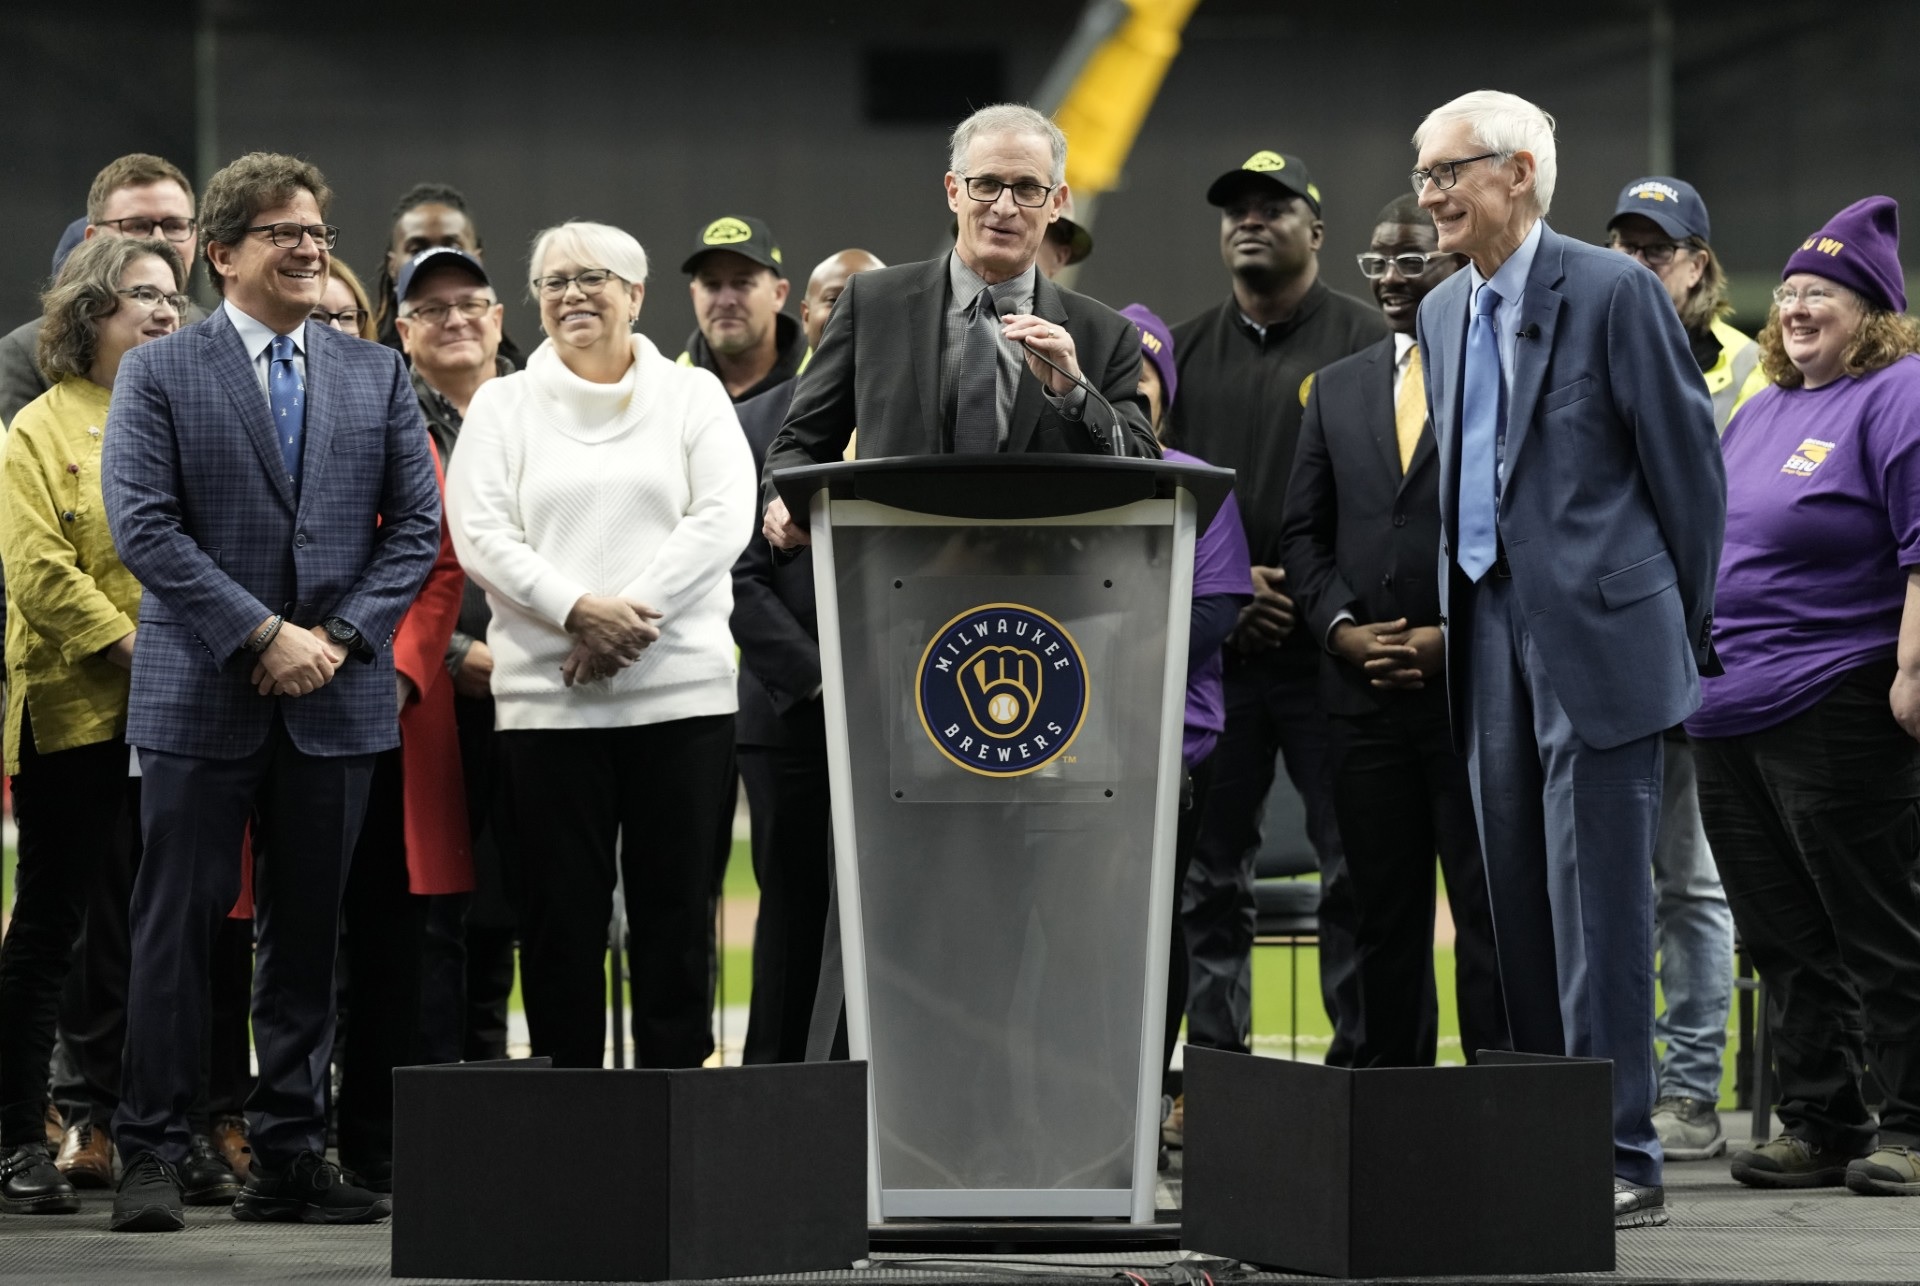 Brewers president Rick Schlesinger on Hank the Dog, $500 million taxpayer funded stadium deal, playing PlayStation on the big scoreboard